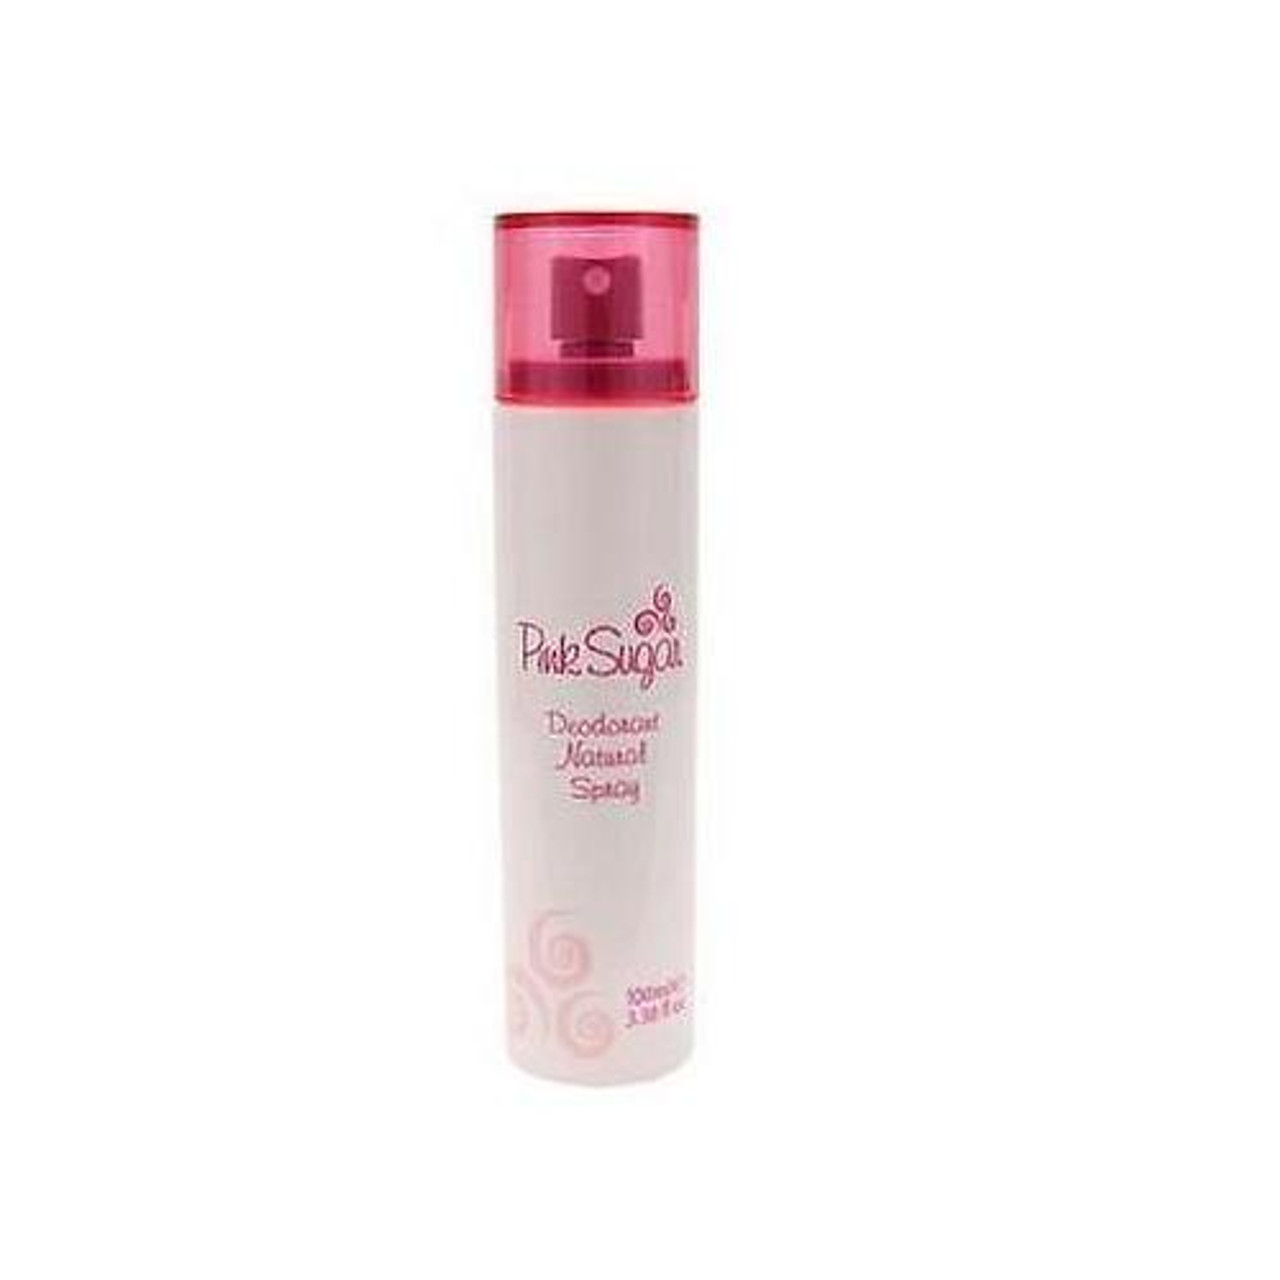 Pink Sugar by Aquolina 3.4 oz EDT for women Tester